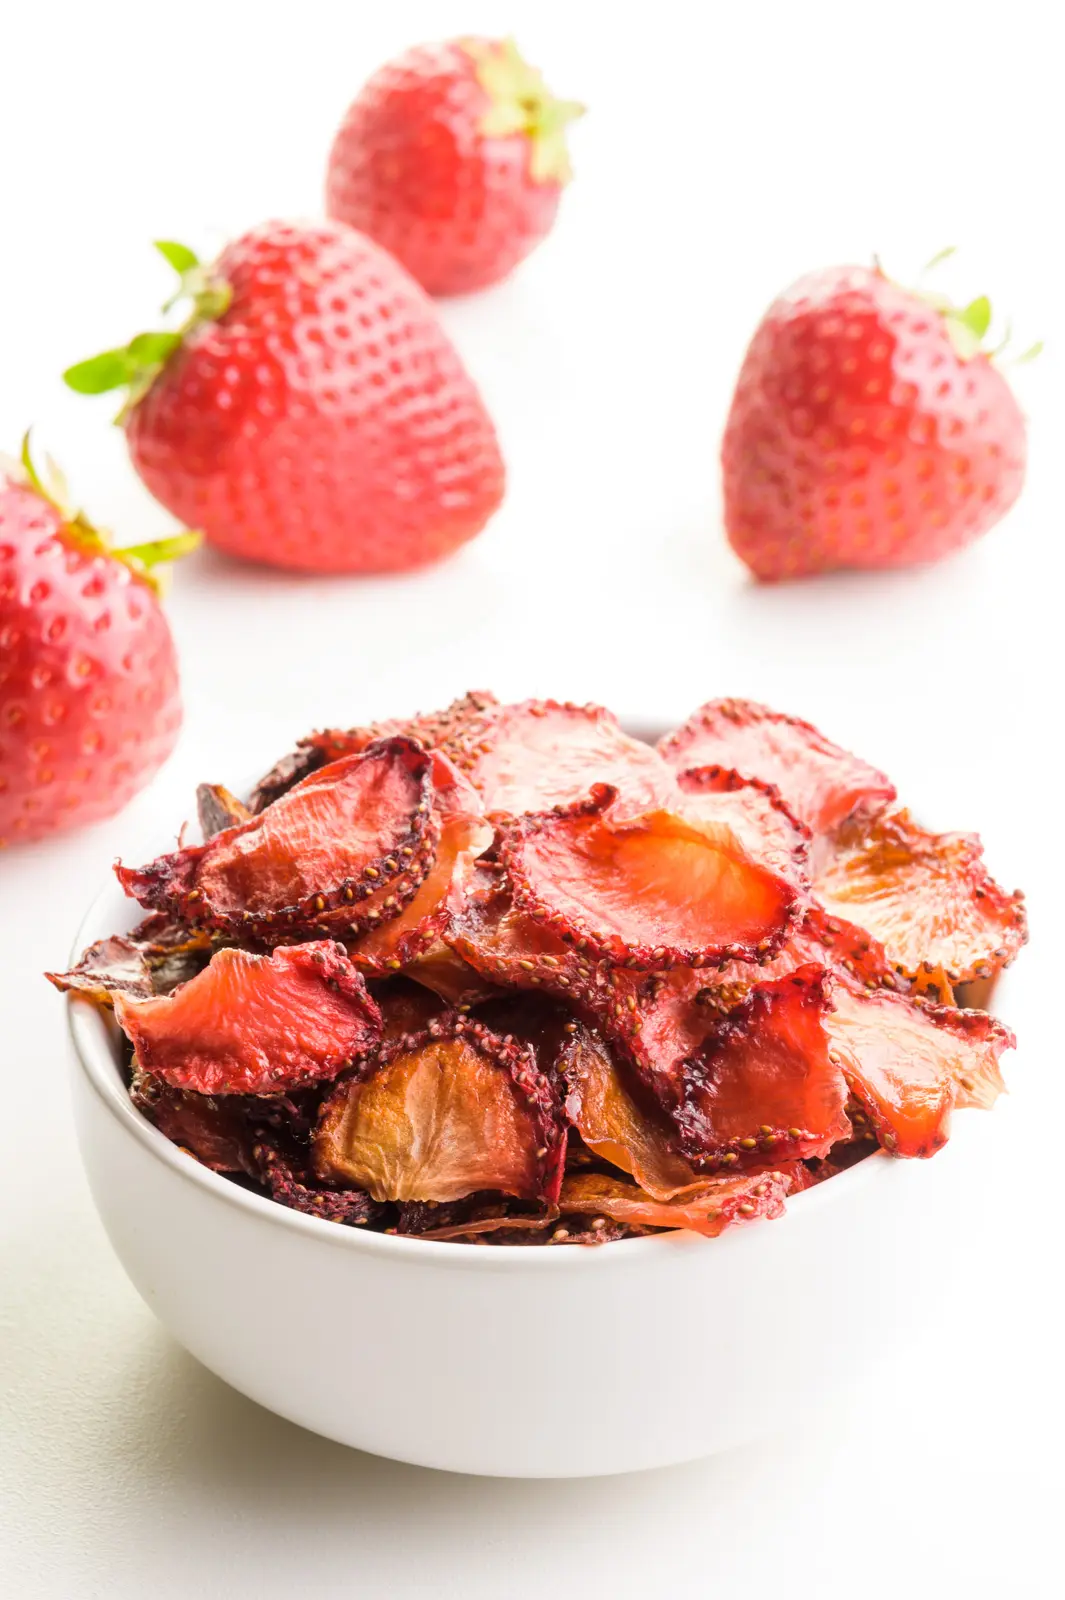 Dehydrated Strawberry Chips - Dehydrator Snack Ideas